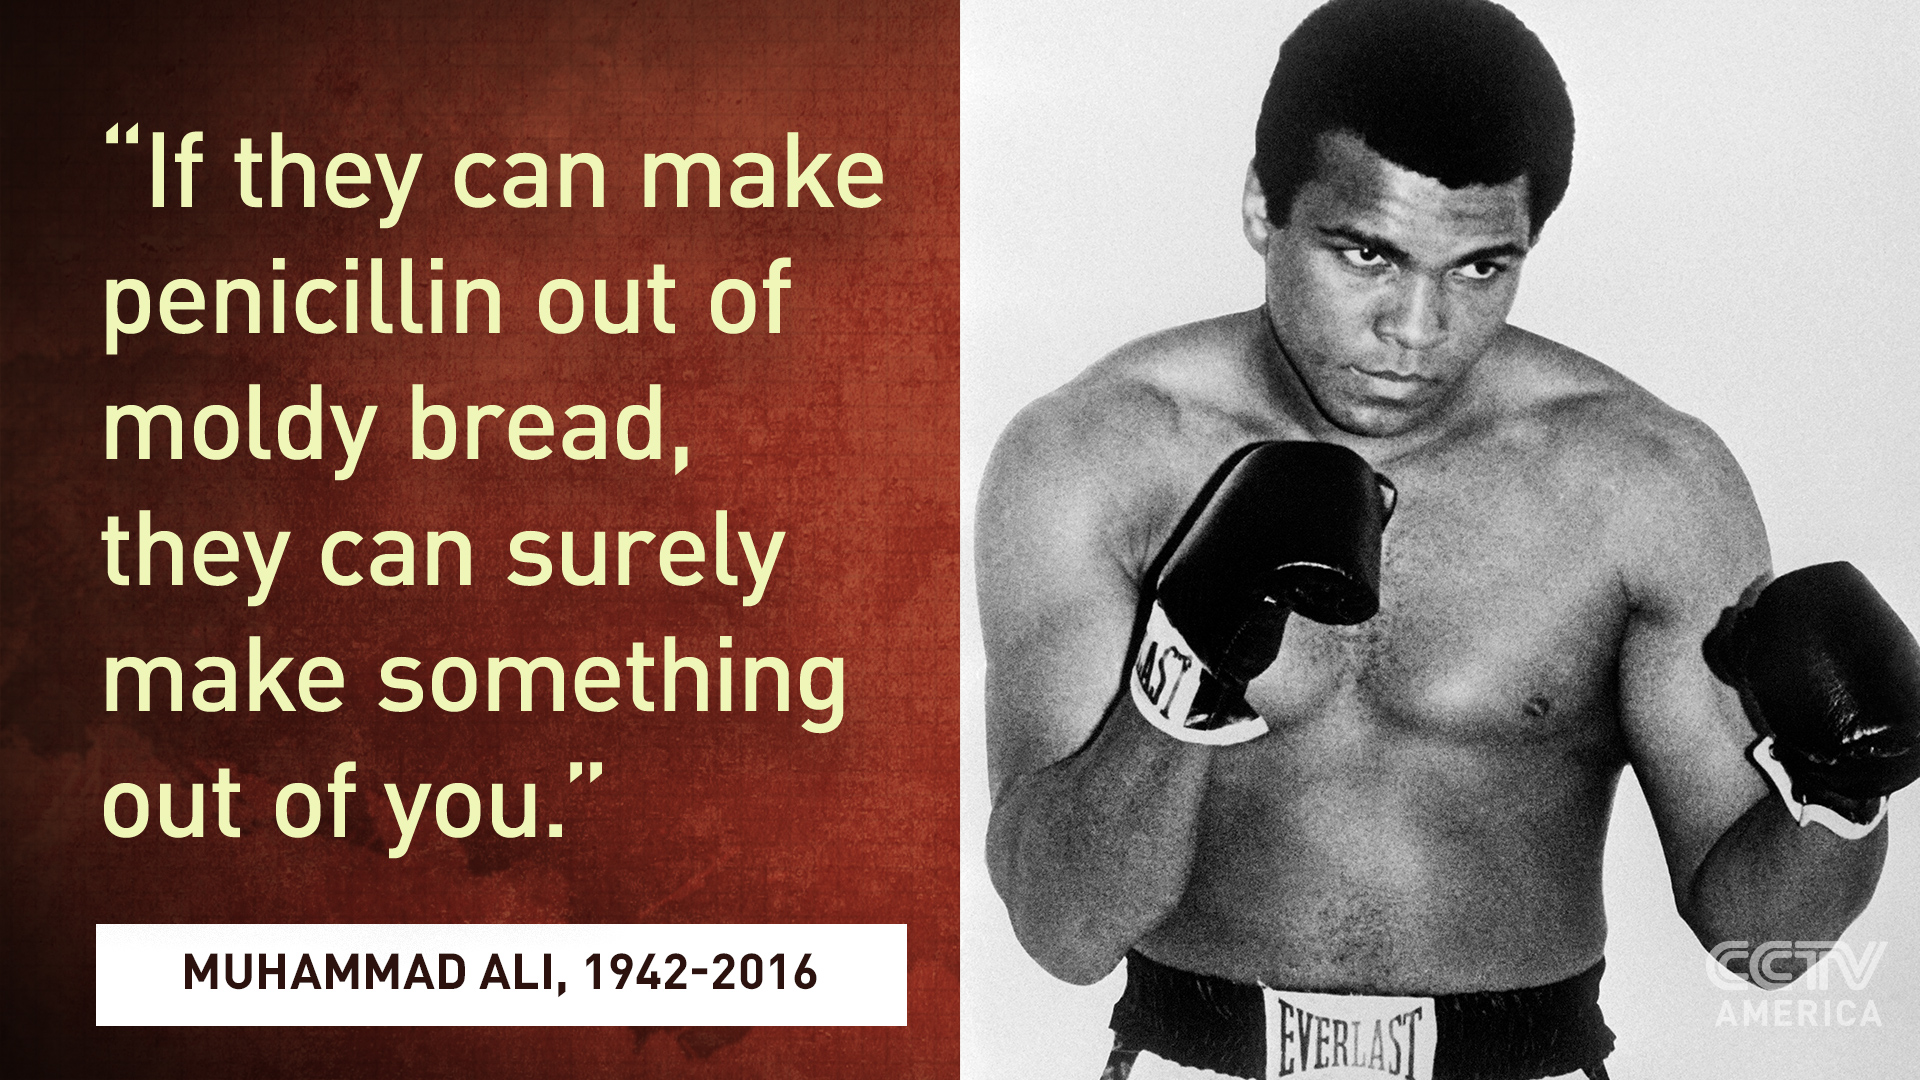 Ali Quote: If they can make penicillin out of moldy bread, they can sure make something out of you.